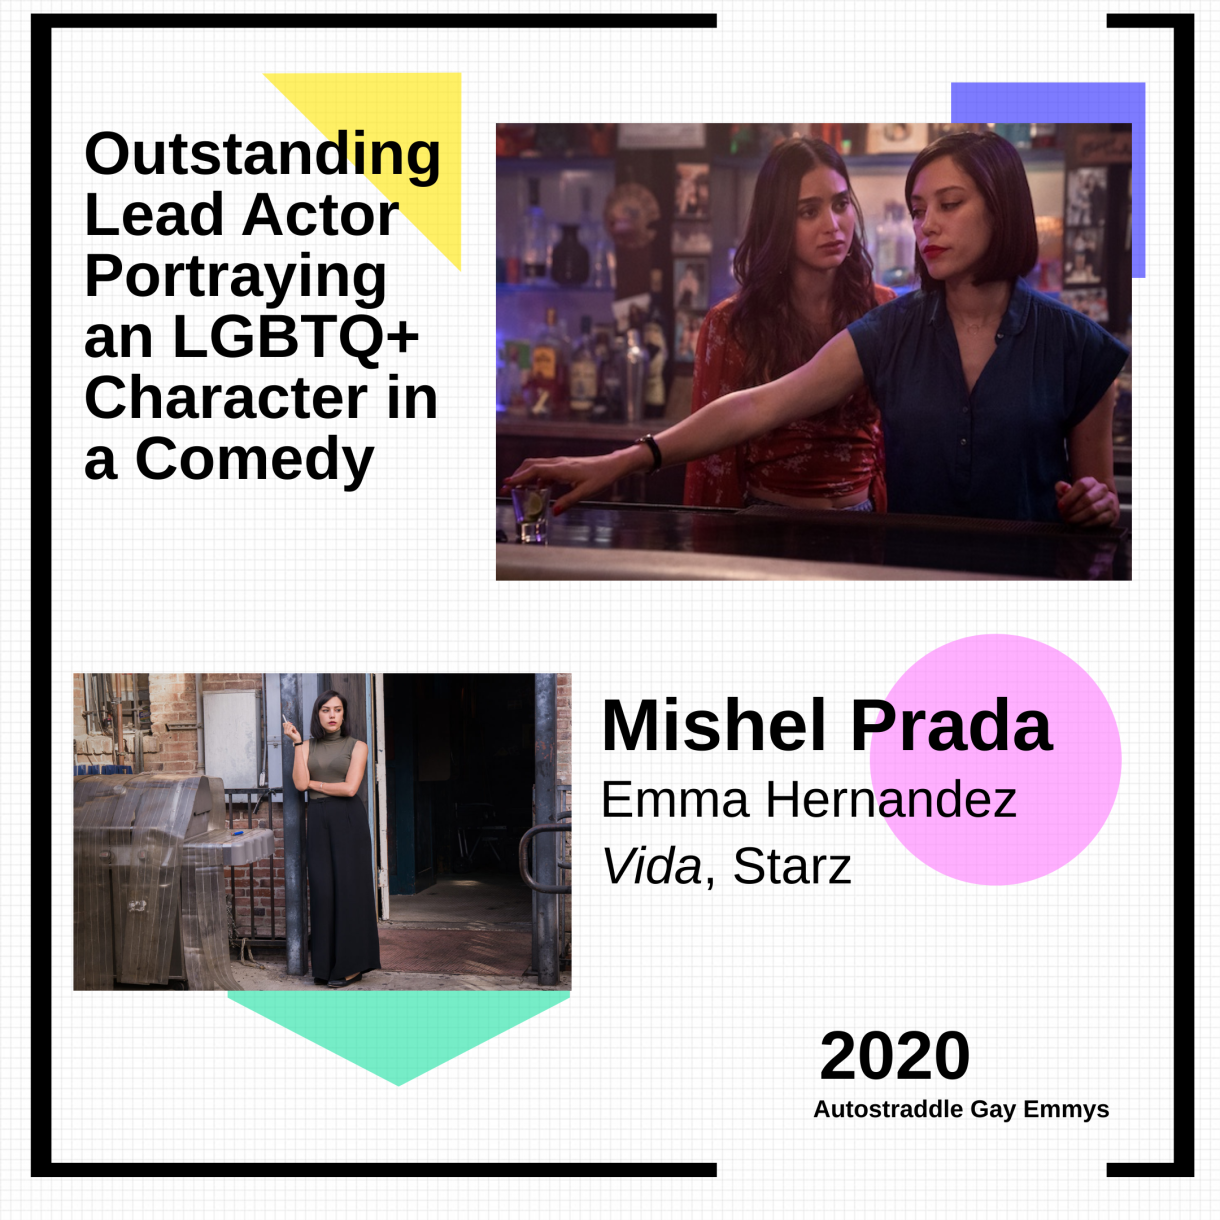 Graphic announcing Outstanding Lead Actor Portraying an LGBTQ+ Character in a Comedy is Mishel Prada as Emma, Vida